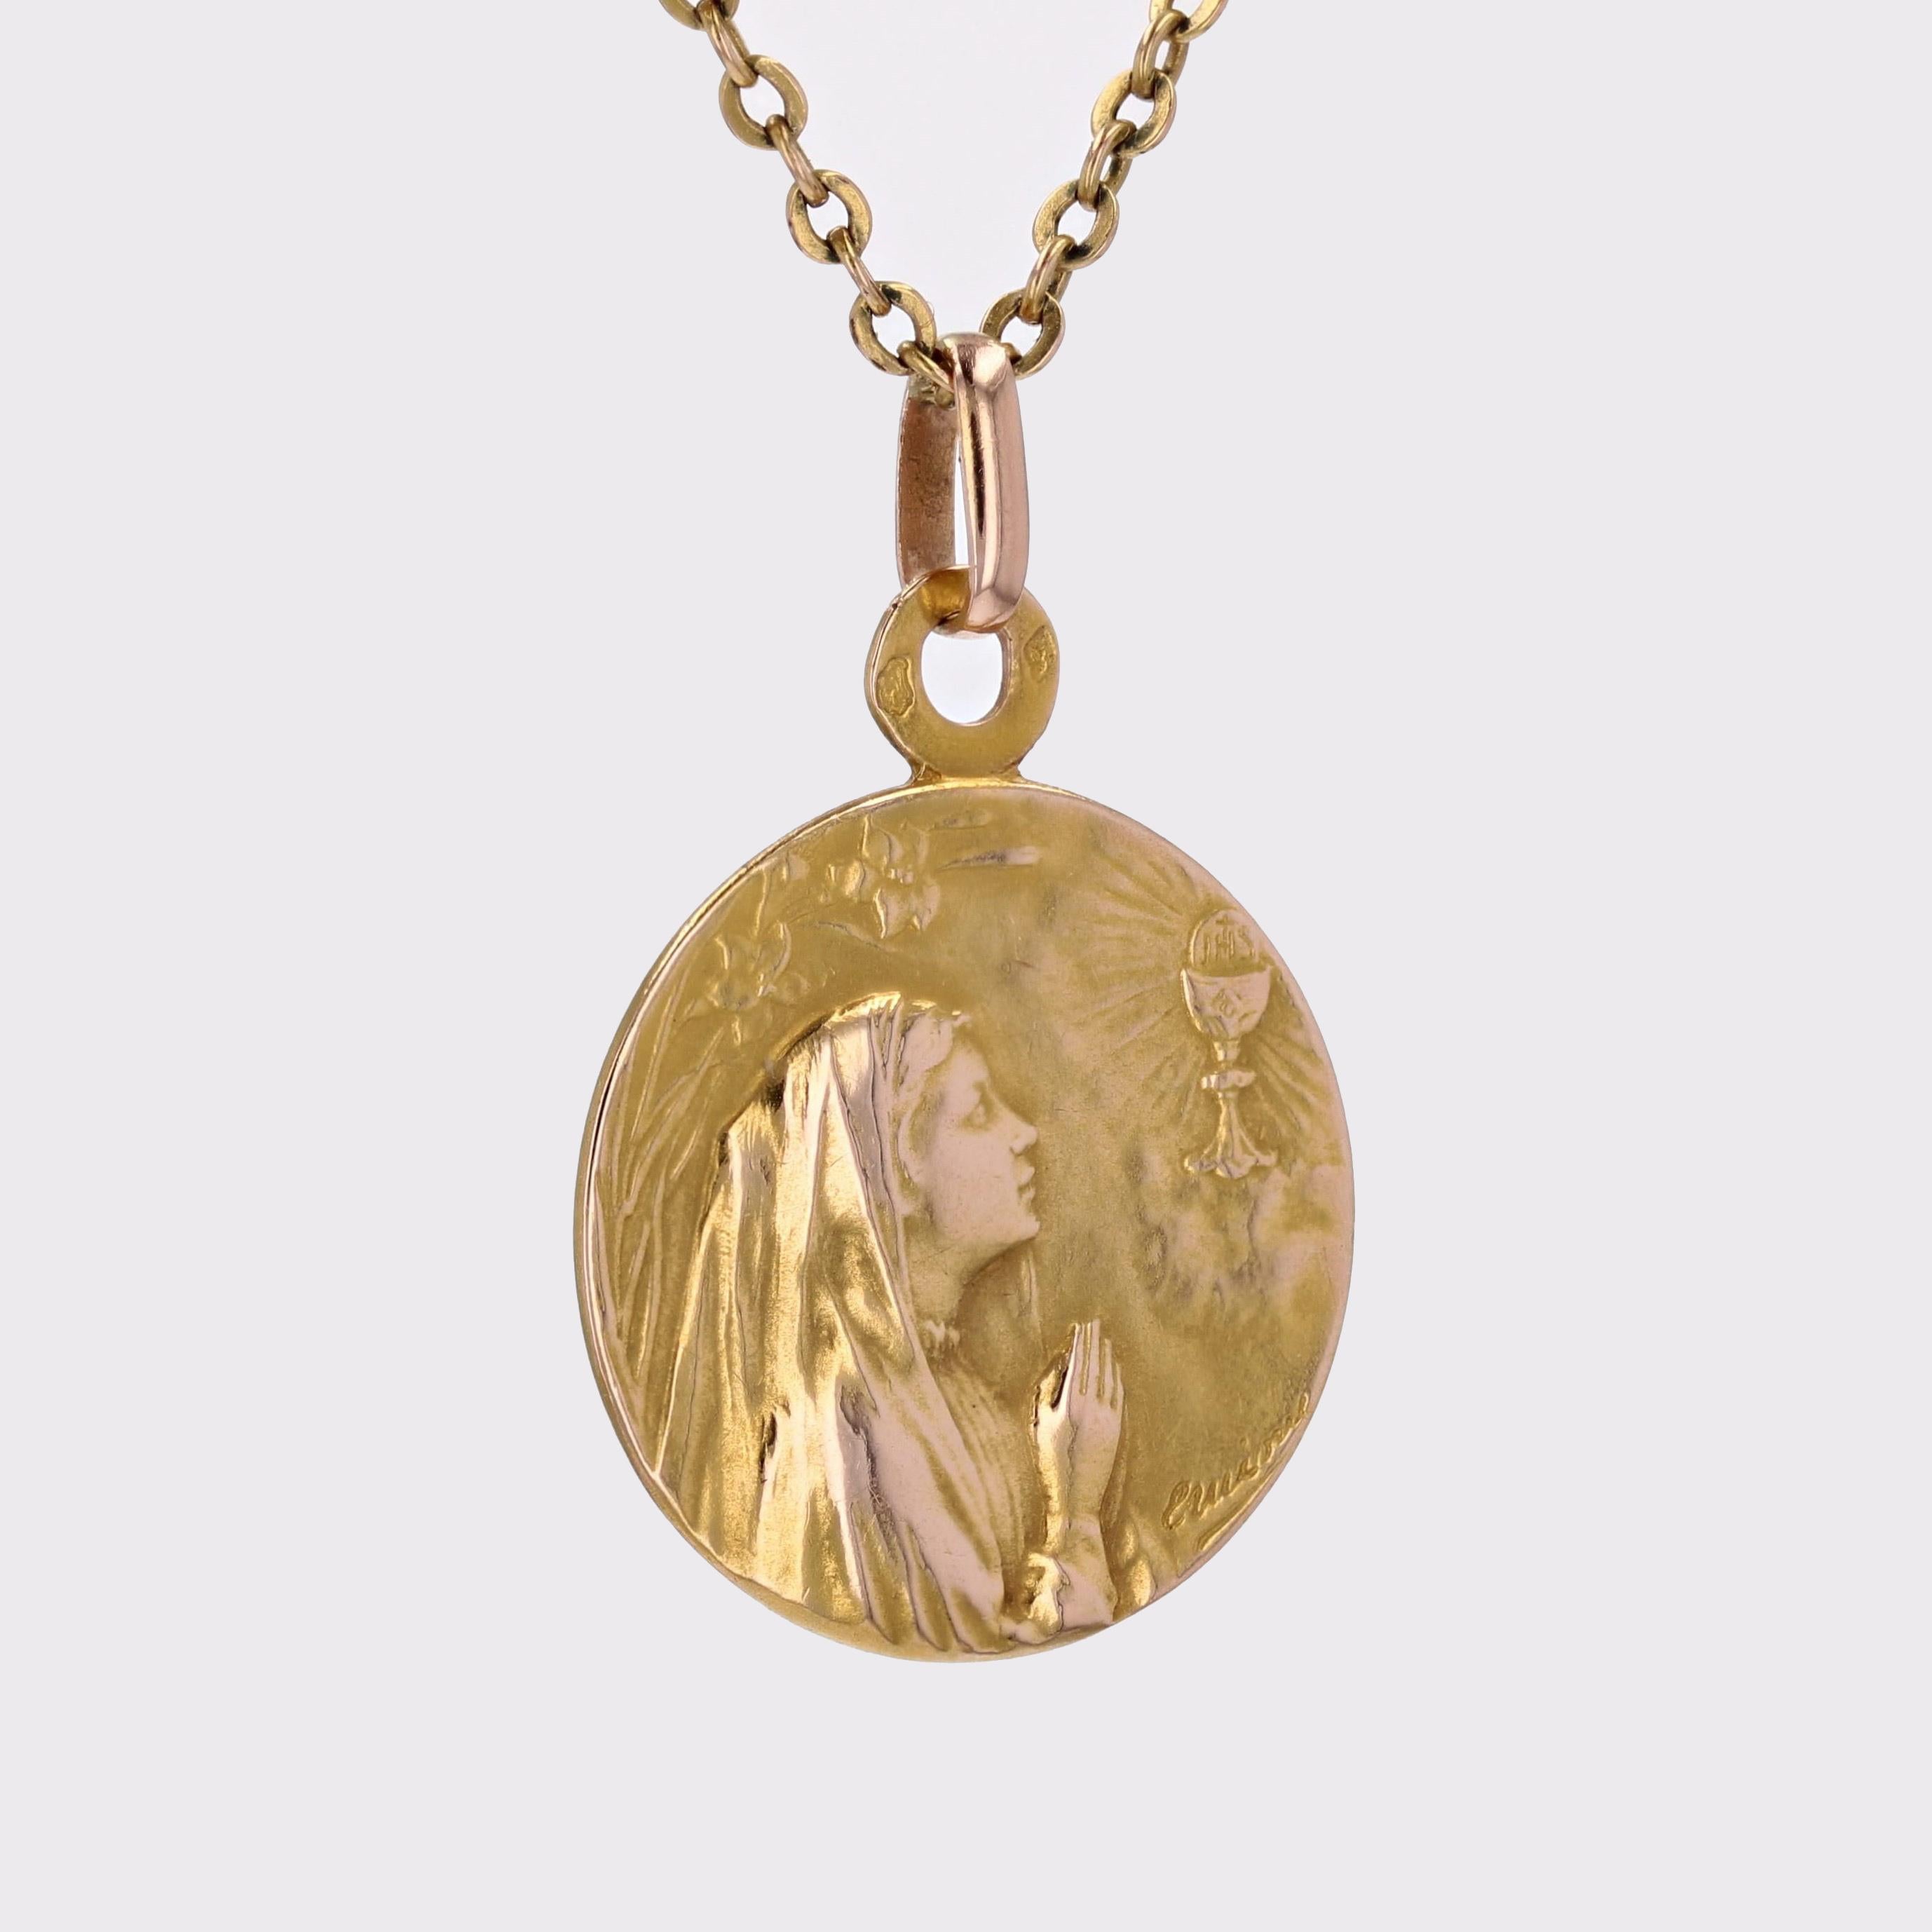 Belle Époque French 20th Century 18 Karat Yellow Gold Virgin and Chalice Medal Pendant